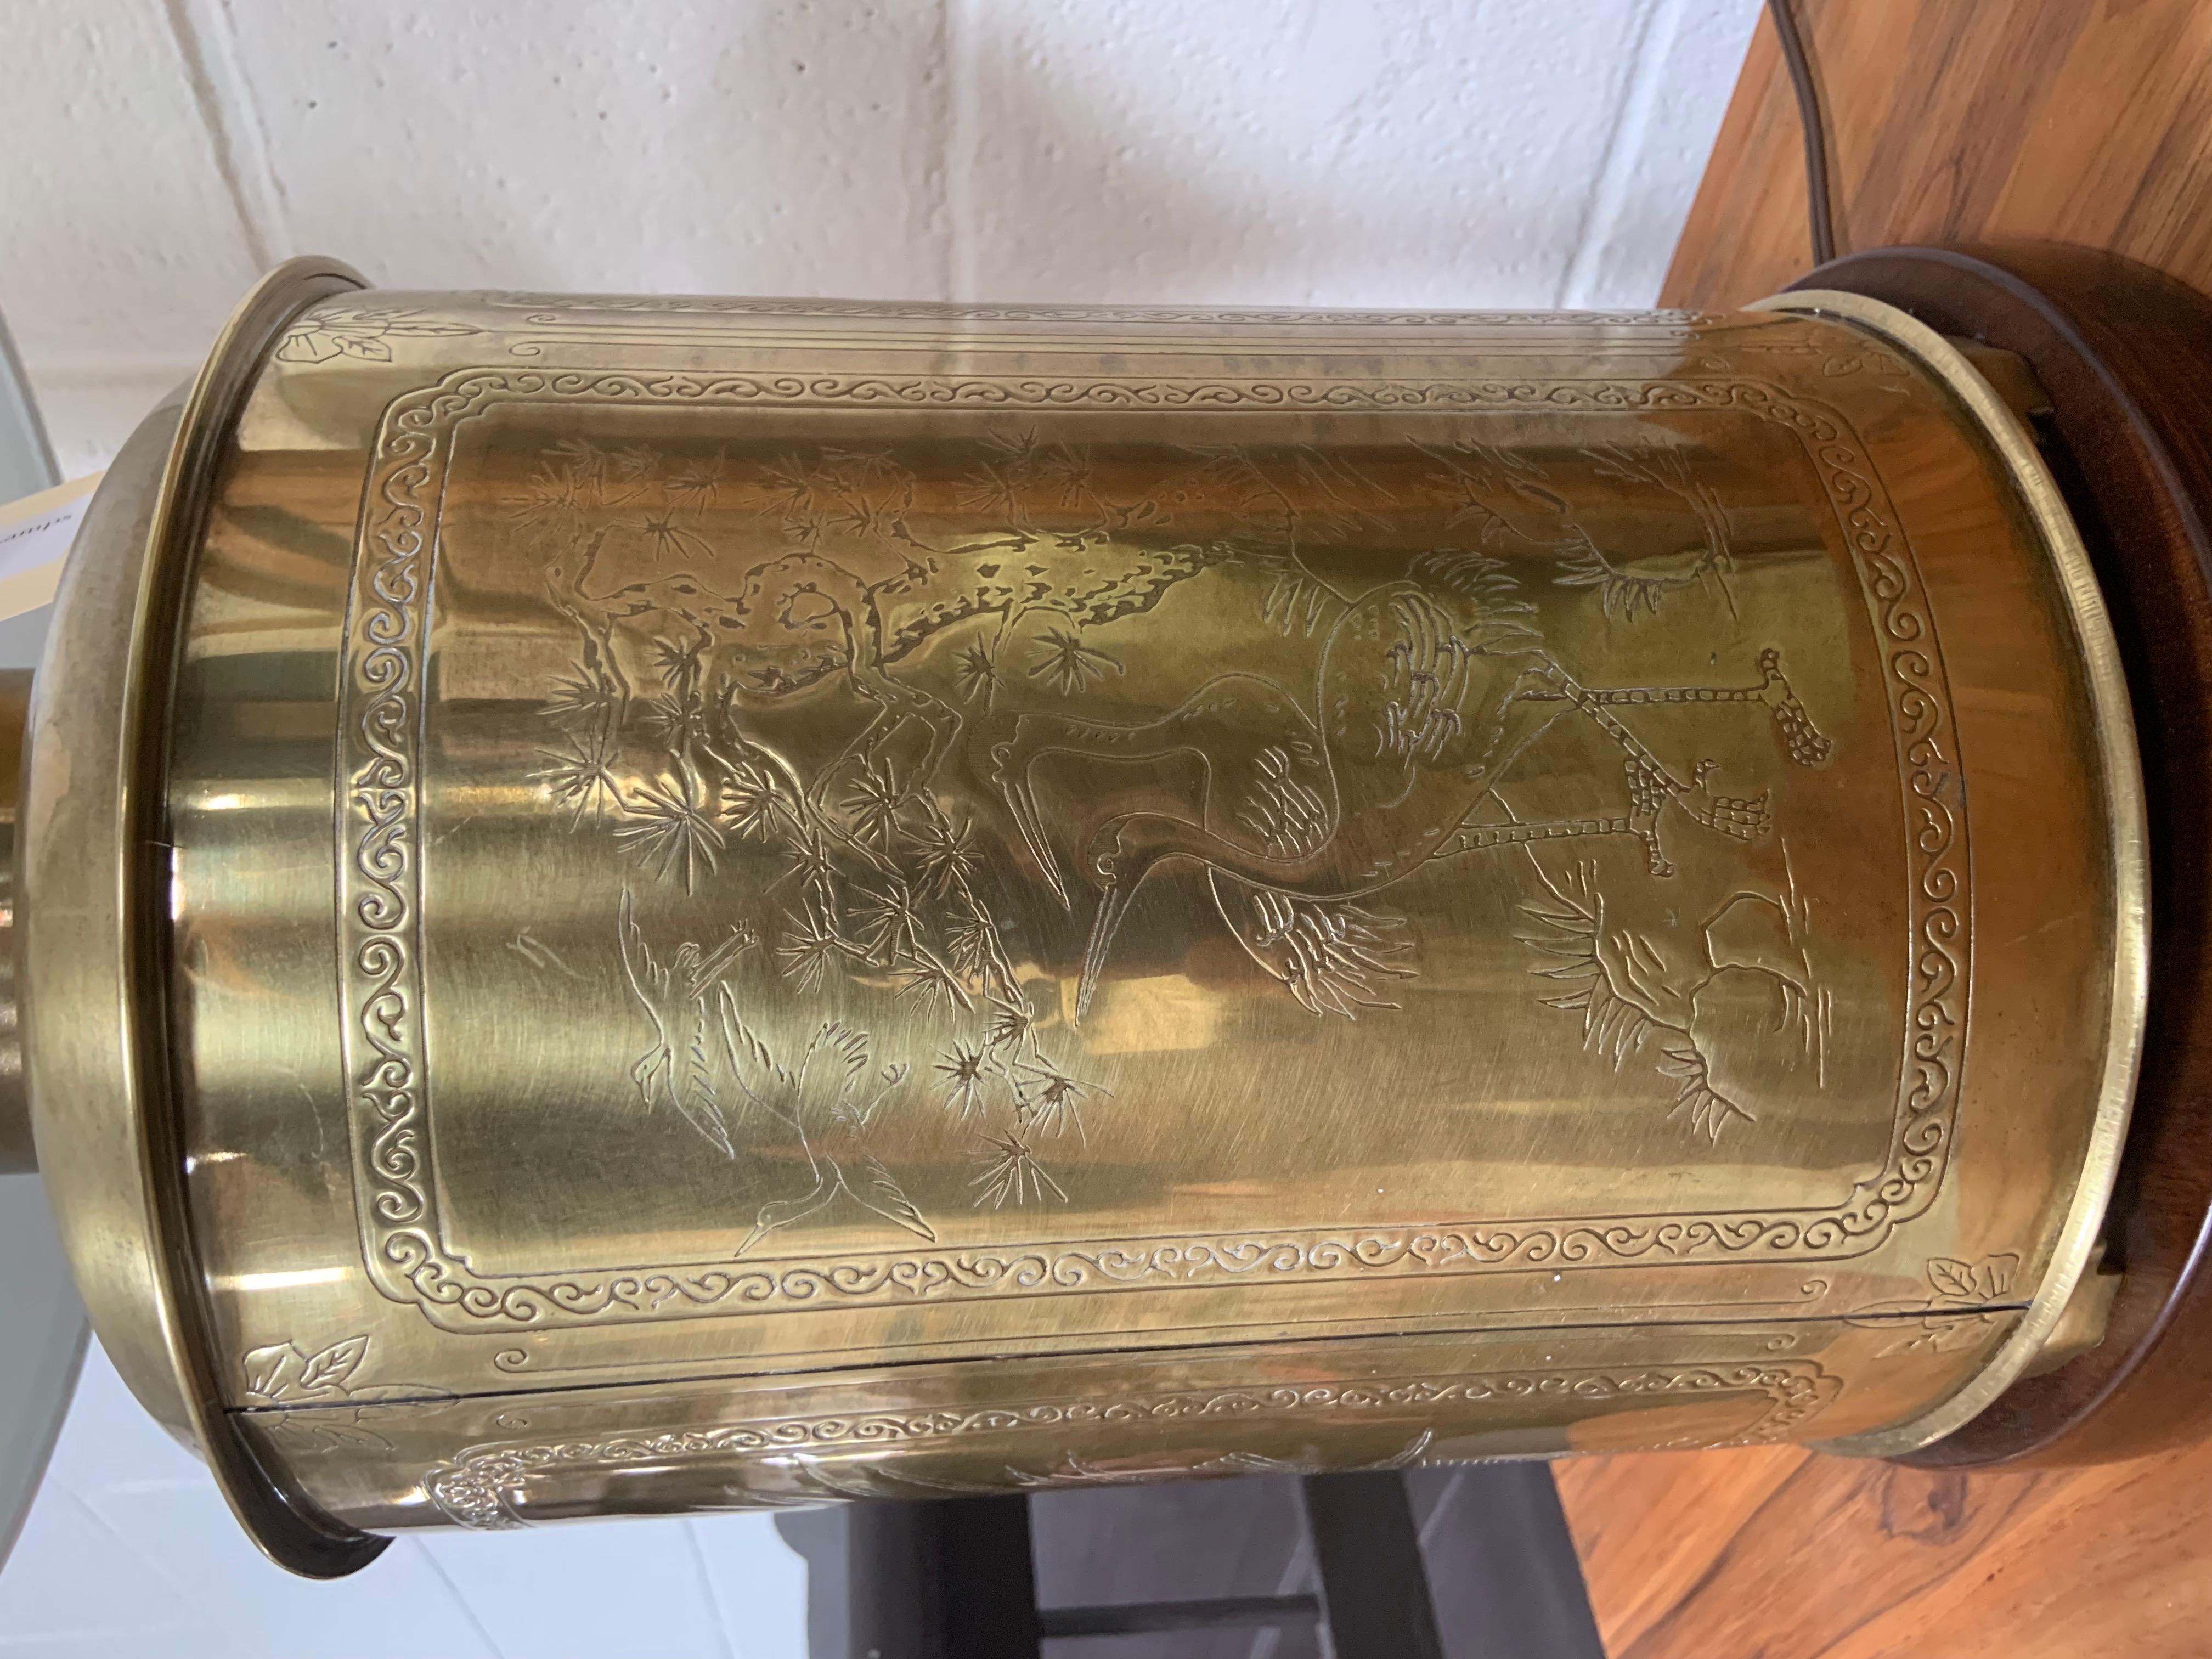 These brass oriental lamps have developed a gorgeous aged patina and are decorated with engraved birds, flowers and symbols. See close up photos for details. Lamps are in great working condition and fits a regular bulb.
New shades are